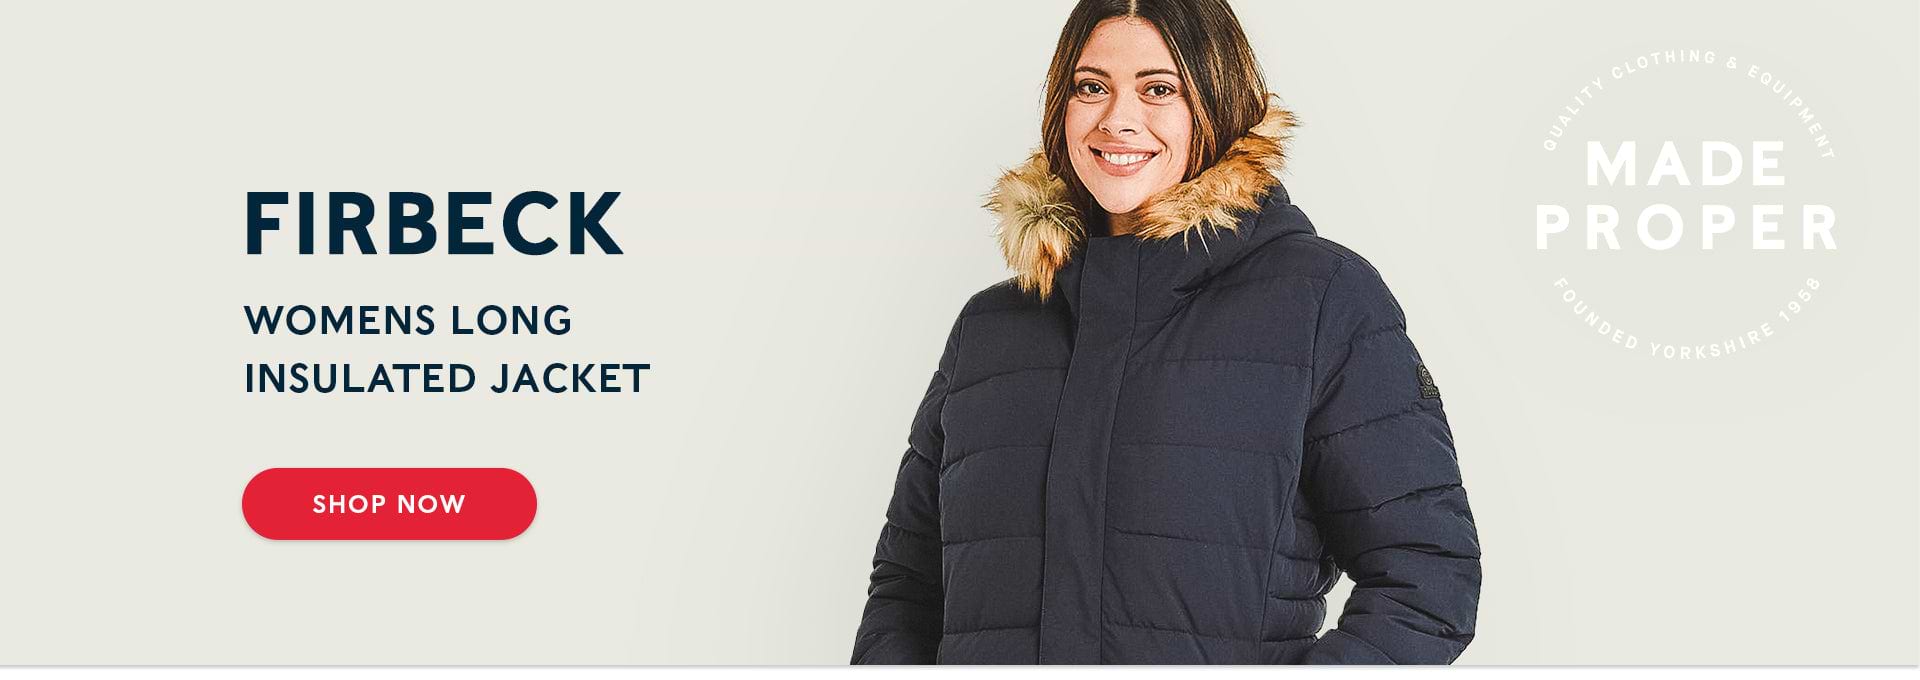 Firbeck Womens Long Insulated Jacket | Shop now